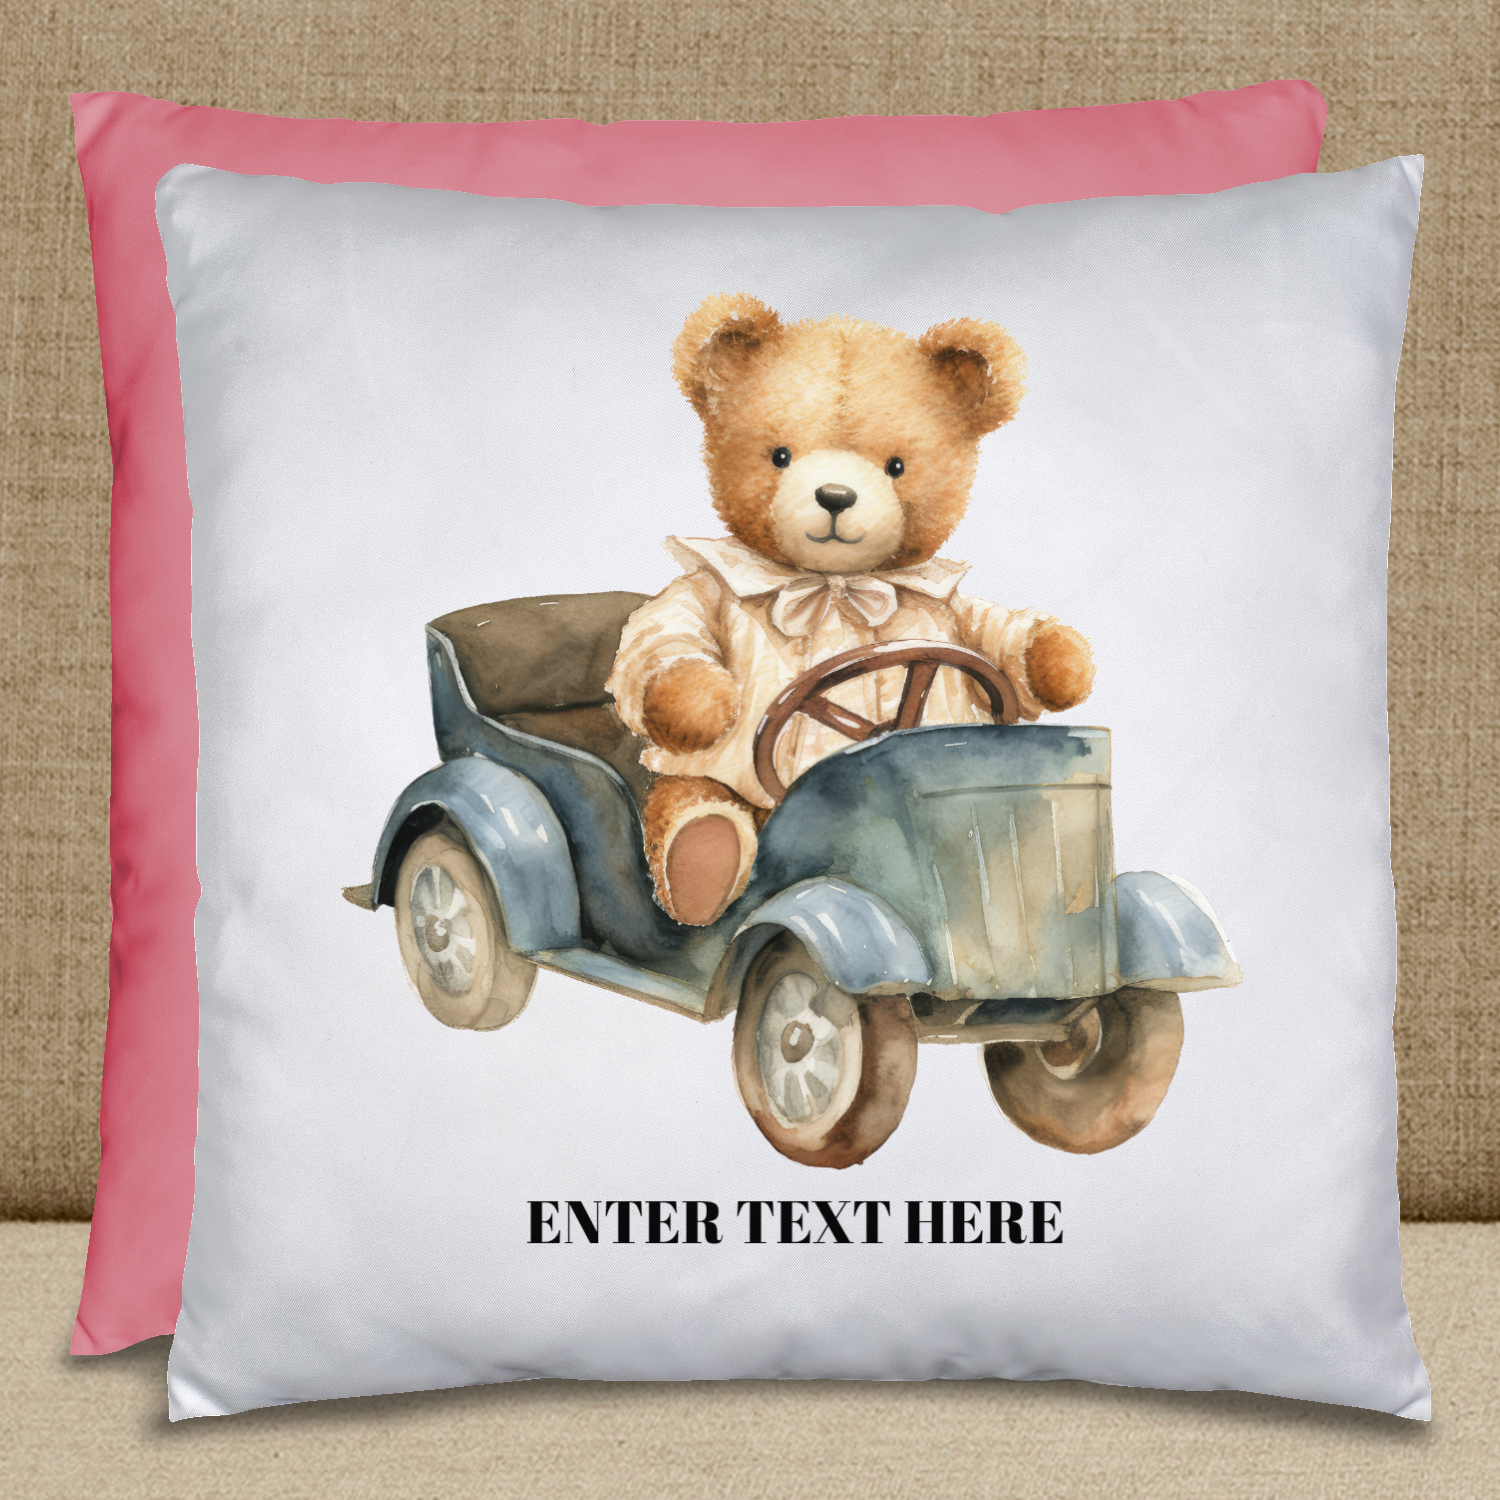 Personalized Throw Pillow - Personalized Teddy Bear Pillow 